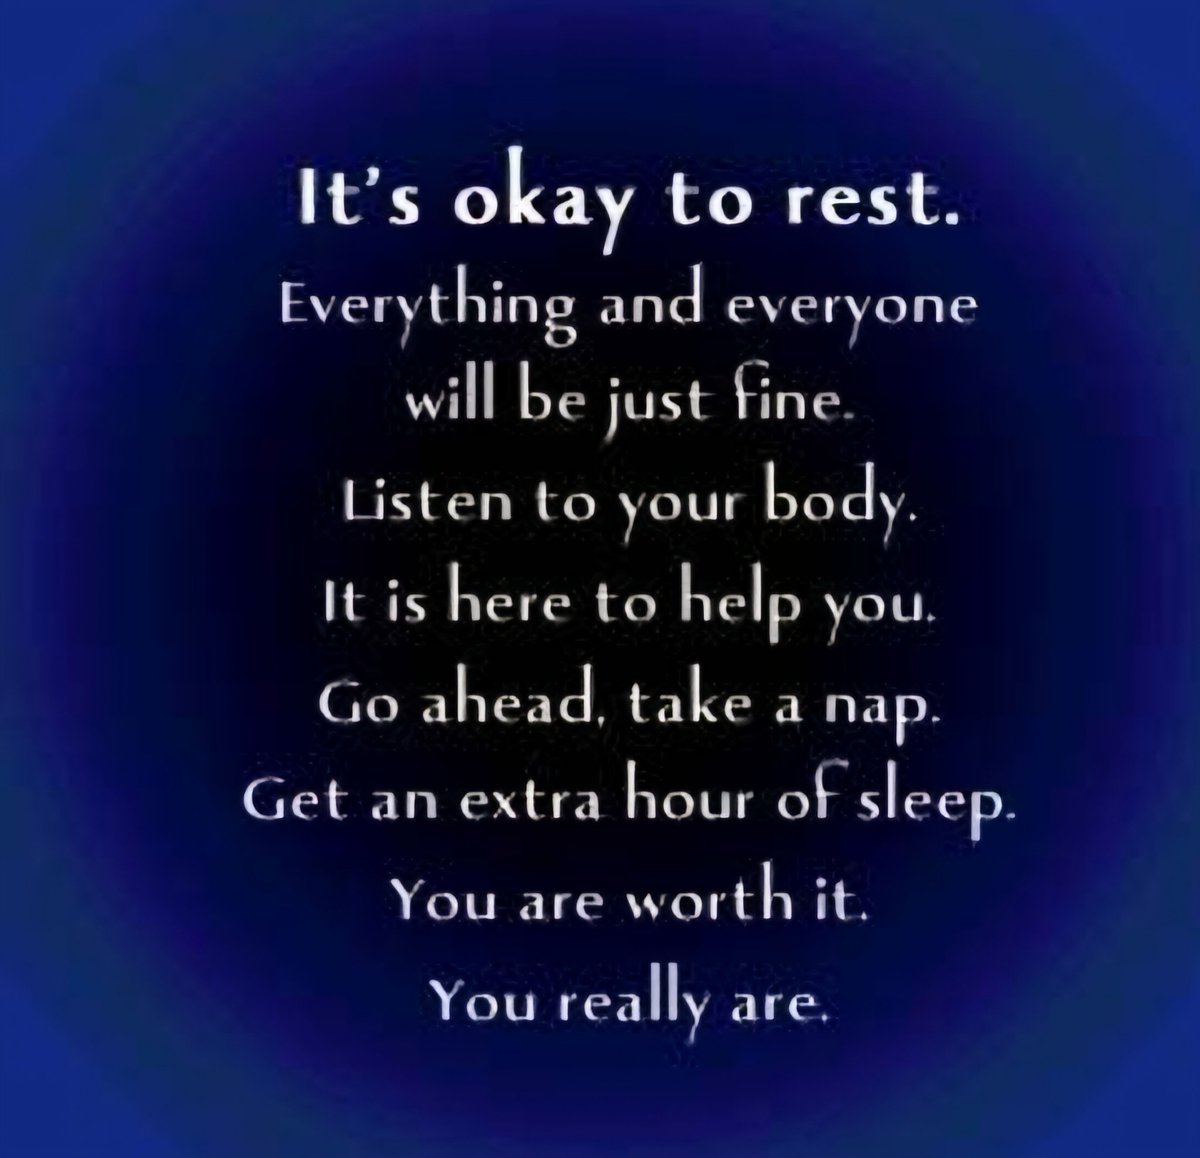 For anyone else who might need this reminder today. Our early run alarm went off this morning and I said nope, I just don't have the energy today. I'm worn out and reset that alarm for another hour of sleep. I don't regret it. 😉 Happy Tuesday! #tuesdayvibe #rest